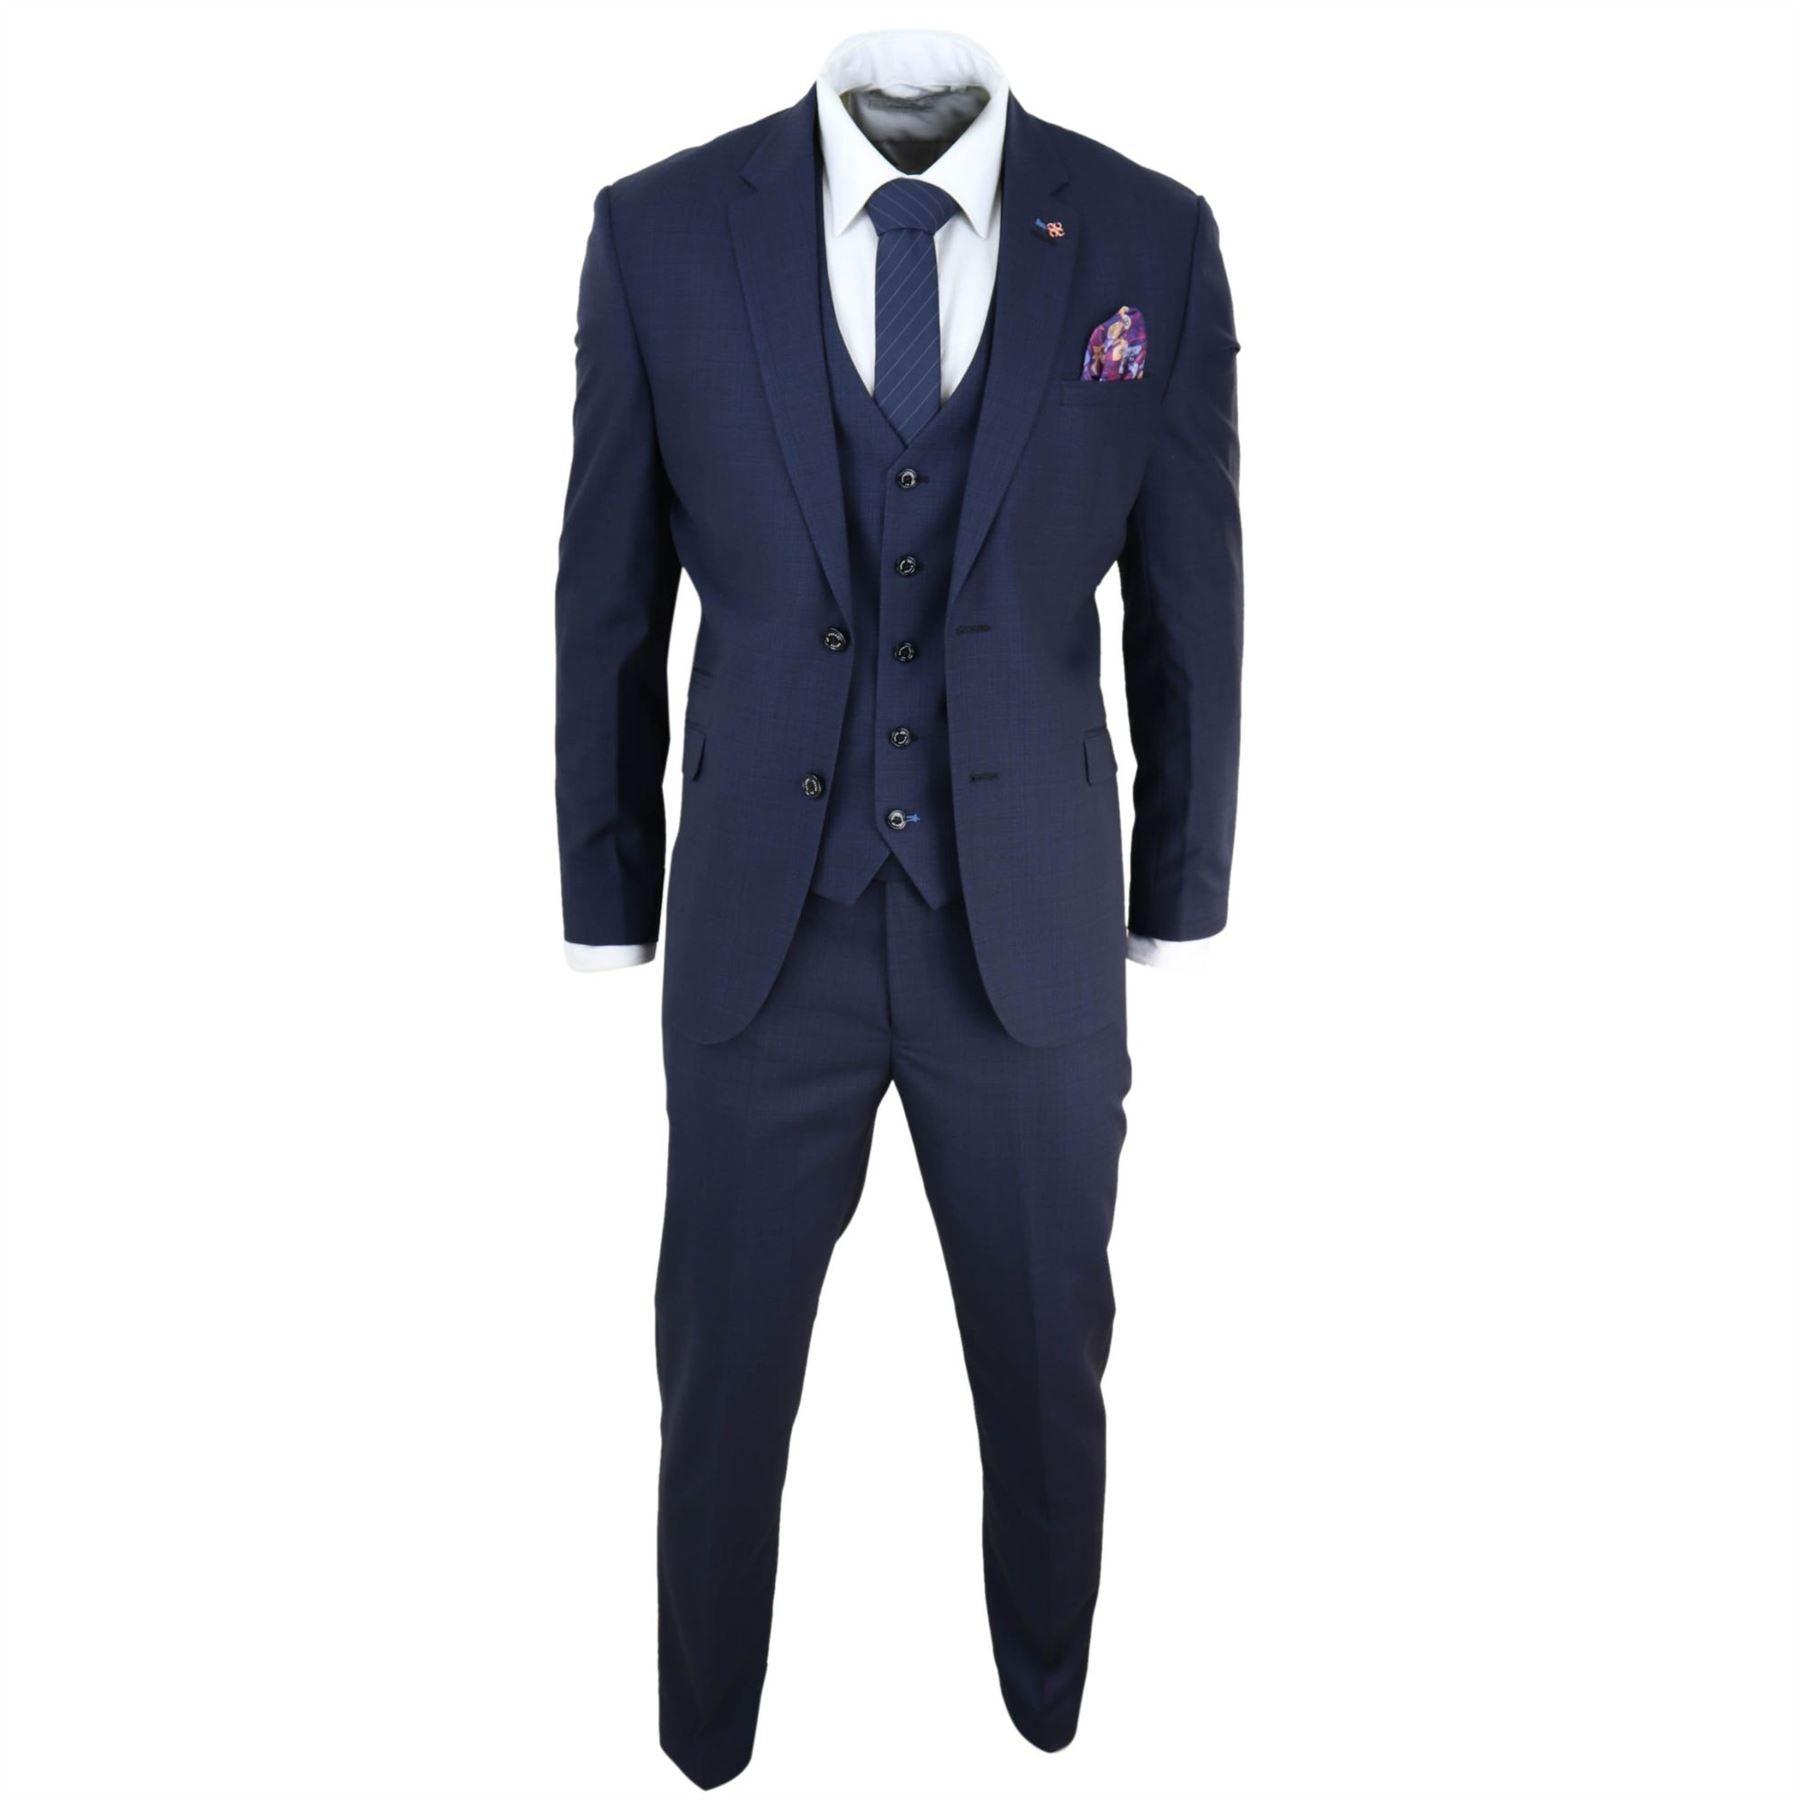 Mens 3 Piece Suit Navy Tailored Fit Classic Retro Vintage Wedding Prom Office - Knighthood Store